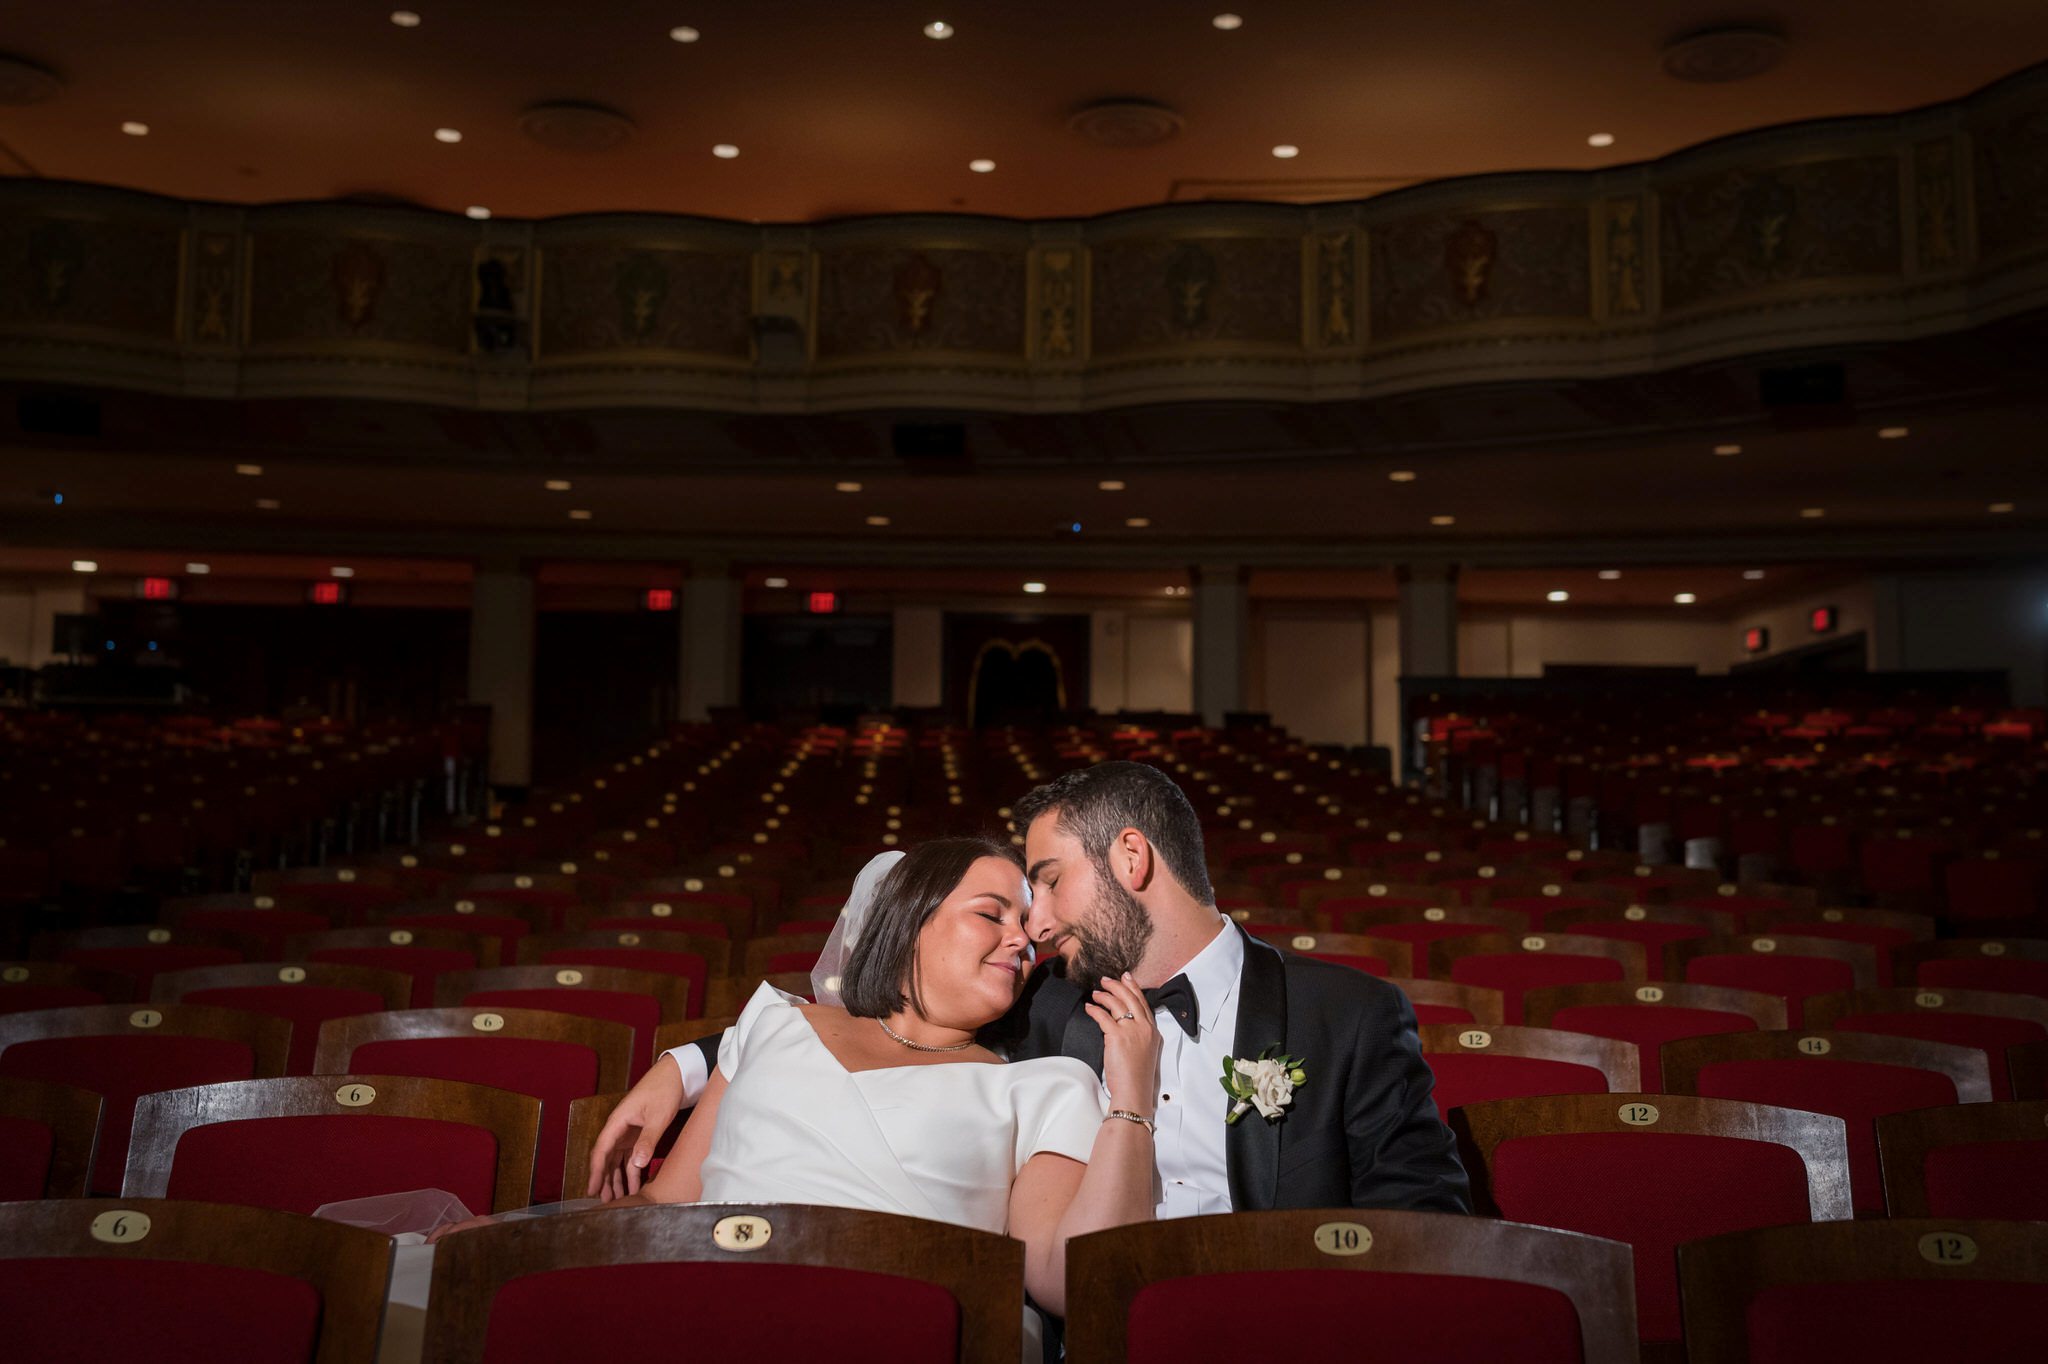 A bride and groom snuggle in the red seats of the Detroit Orchestra Hall wedding.